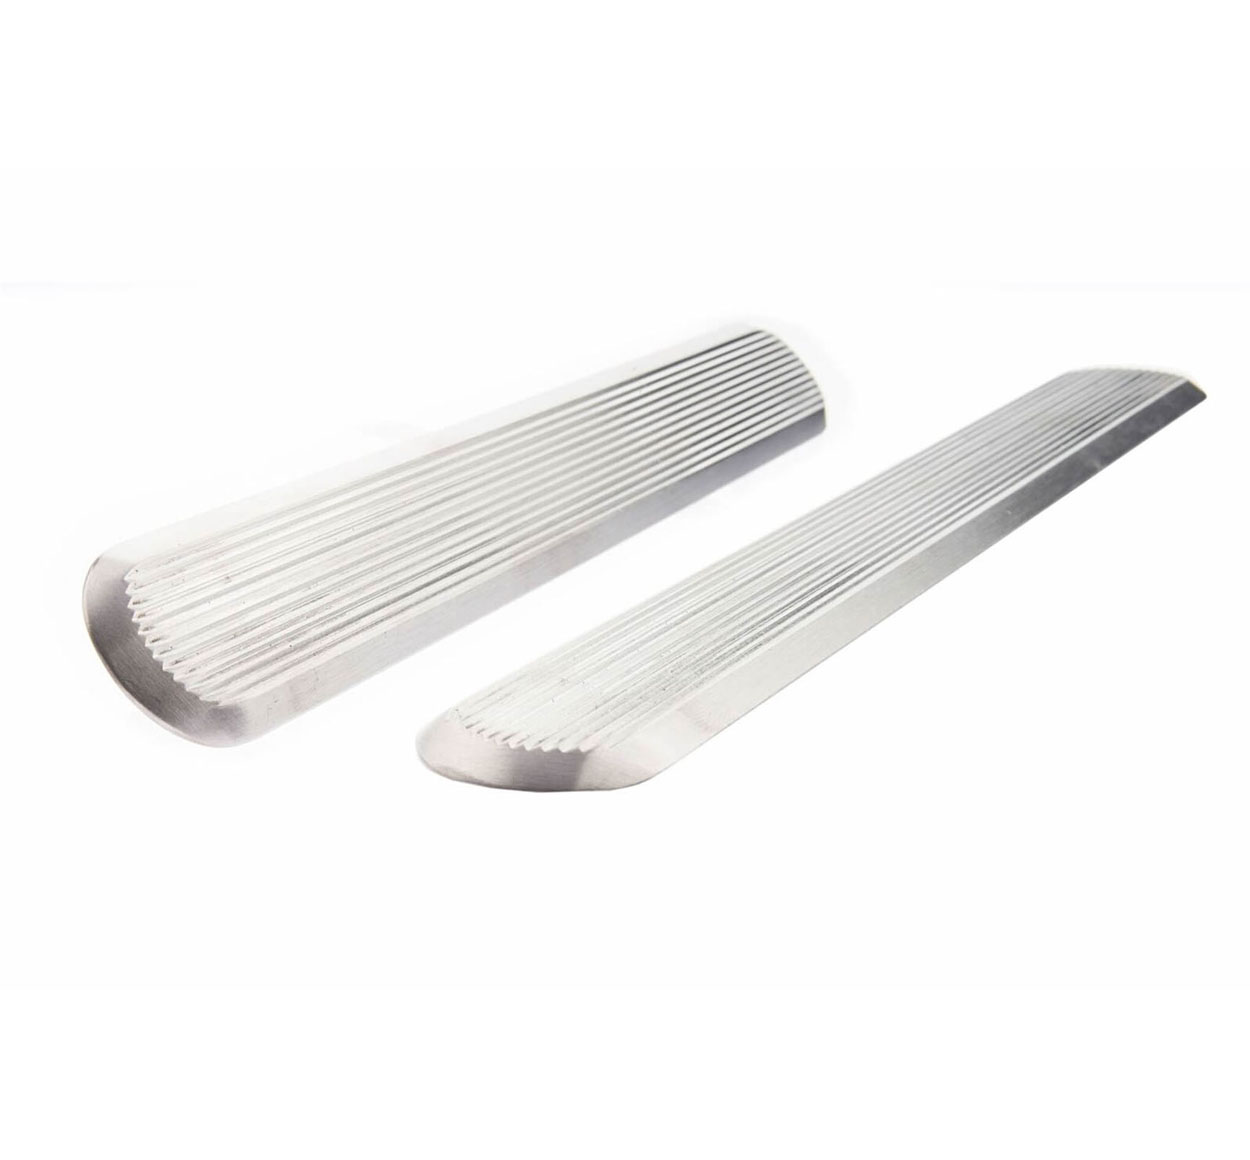 Perth Tactiles Stainless Steel Directional Bar PTSSDB